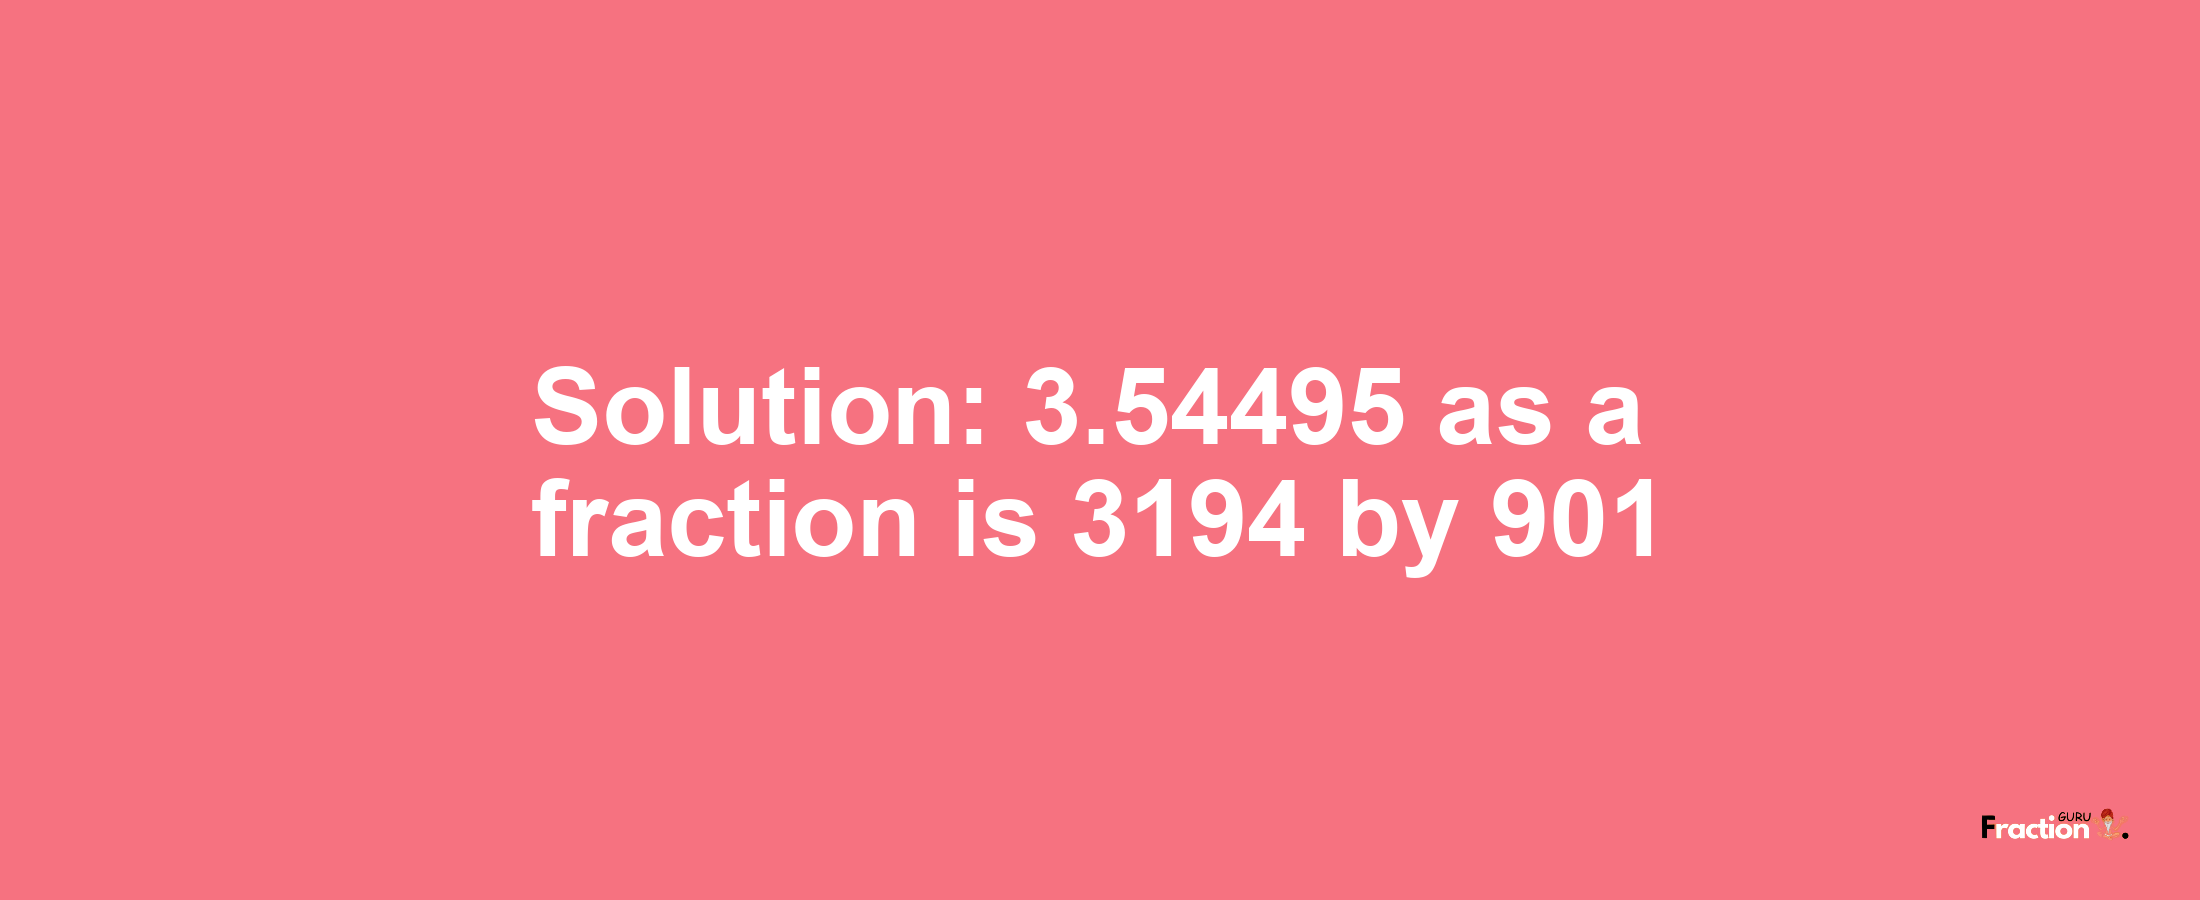 Solution:3.54495 as a fraction is 3194/901